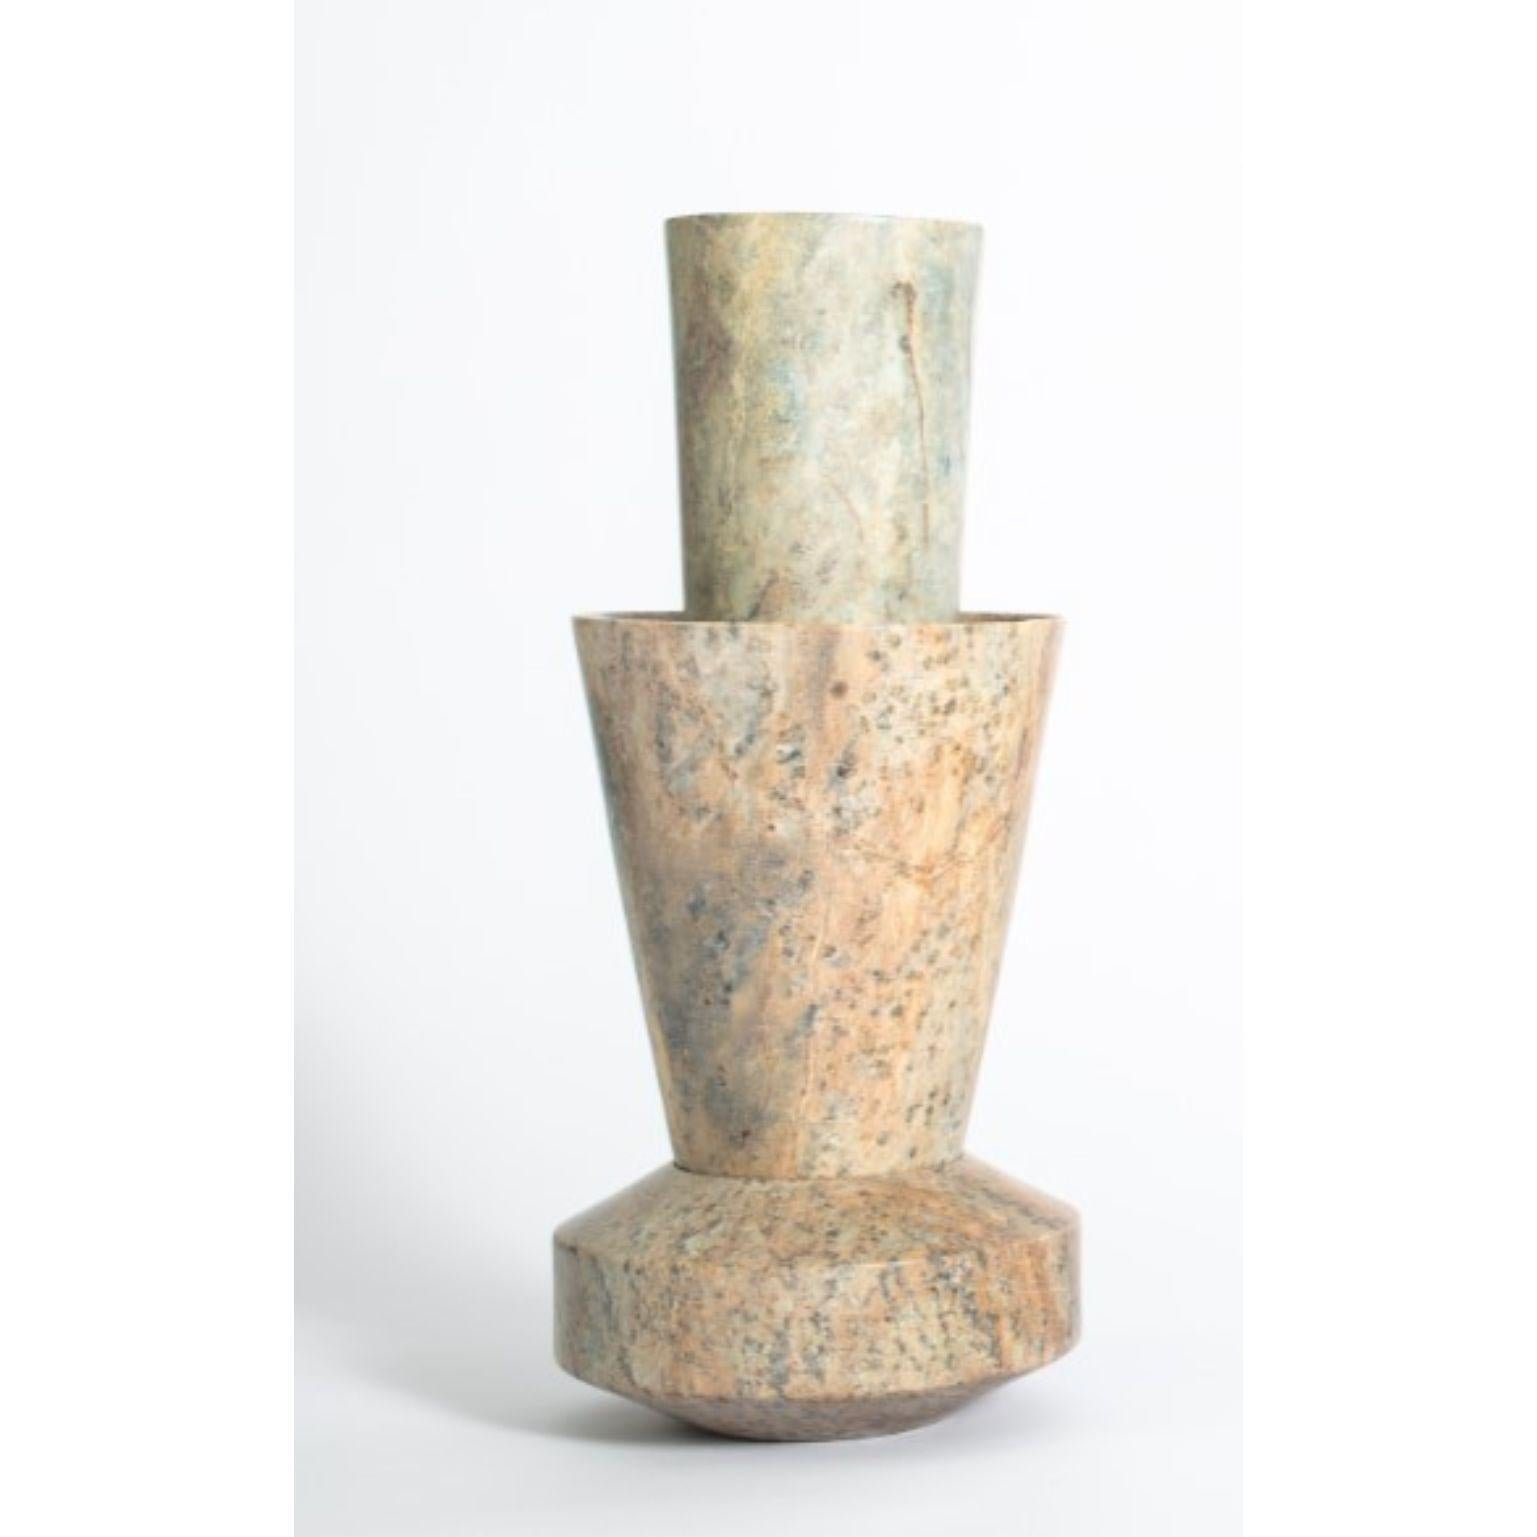 Brota 3 - Soapstone vase by Alva Design
Materials: Soapstone
Dimensions: 15 (Ø) x 40 (H)

ALVA is a furniture and objects design office, formed by brothers Susana Bastos, artist and designer, and Marcelo Alvarenga, architect. Their projects are